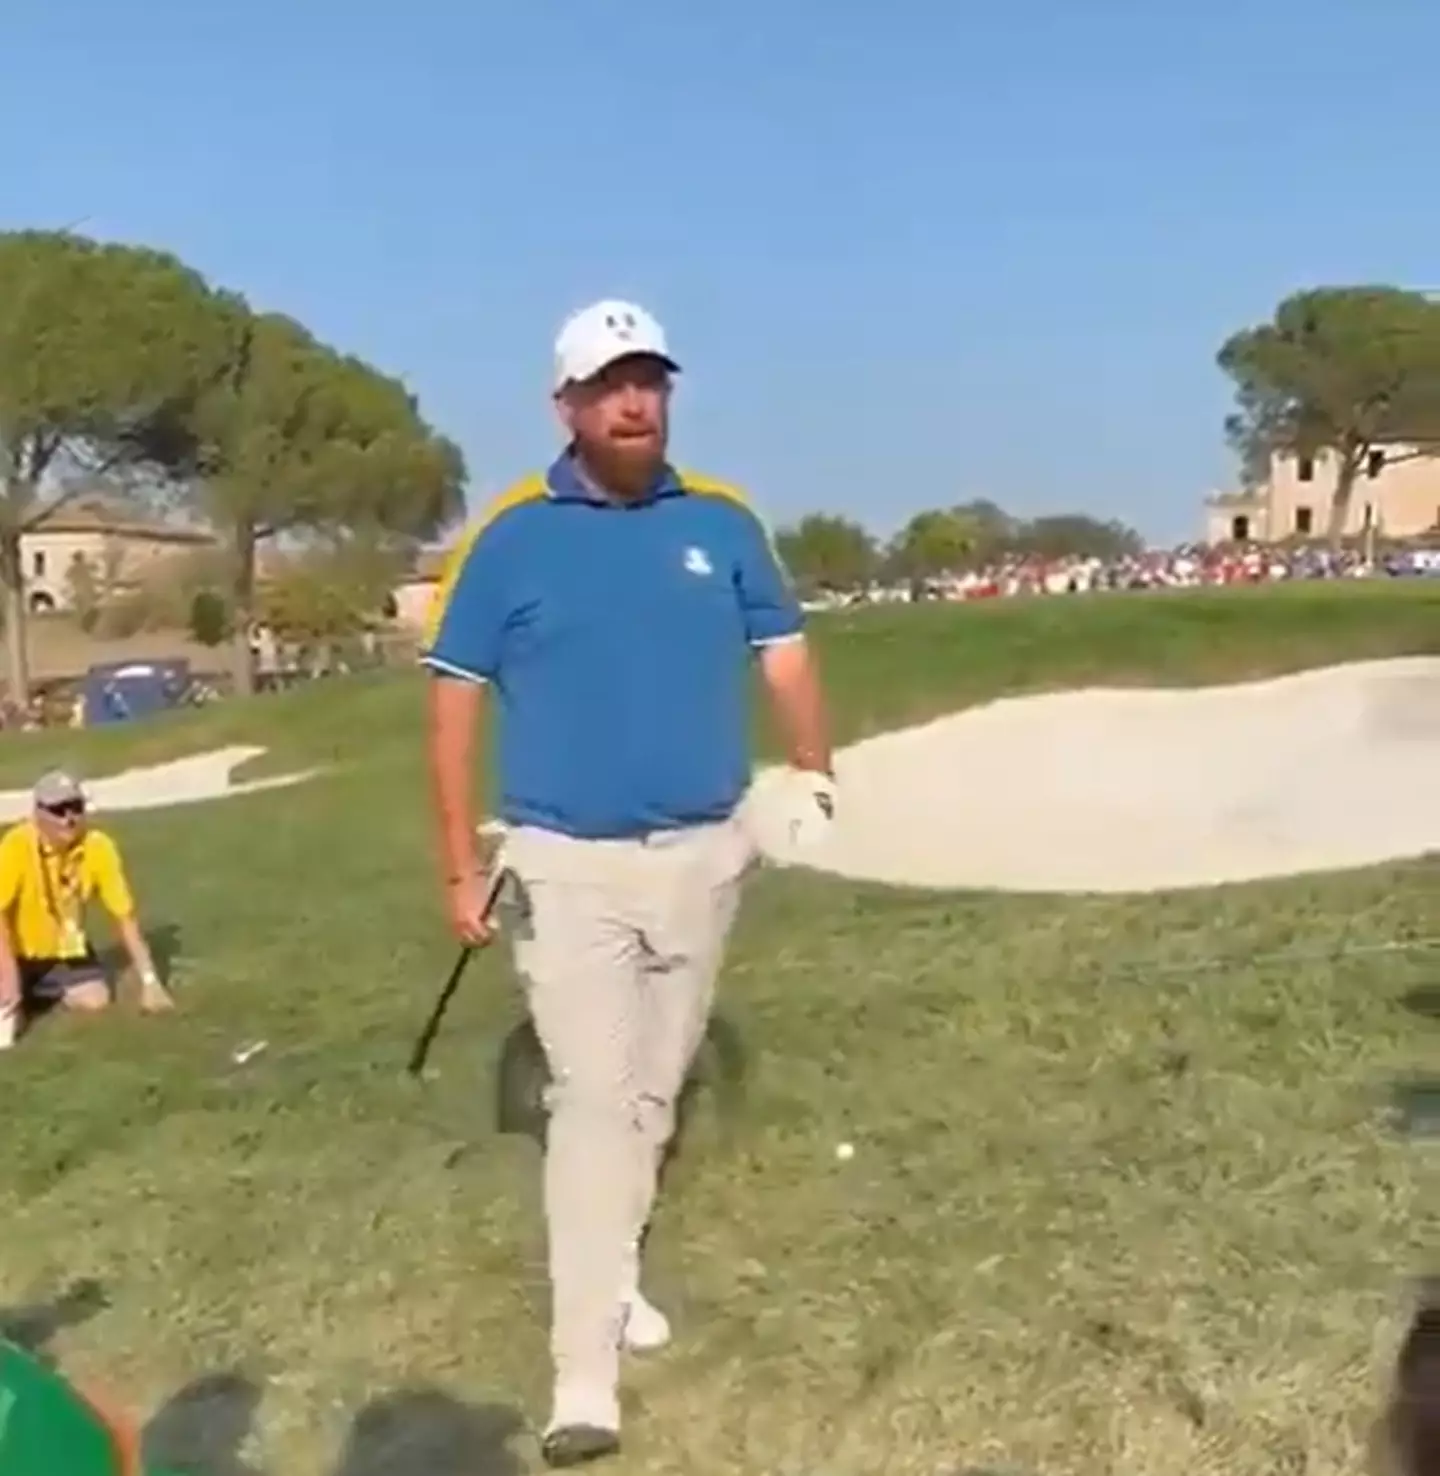 Shane Lowry wasn't happy that the guy trying to stop people from making noise was making noise.